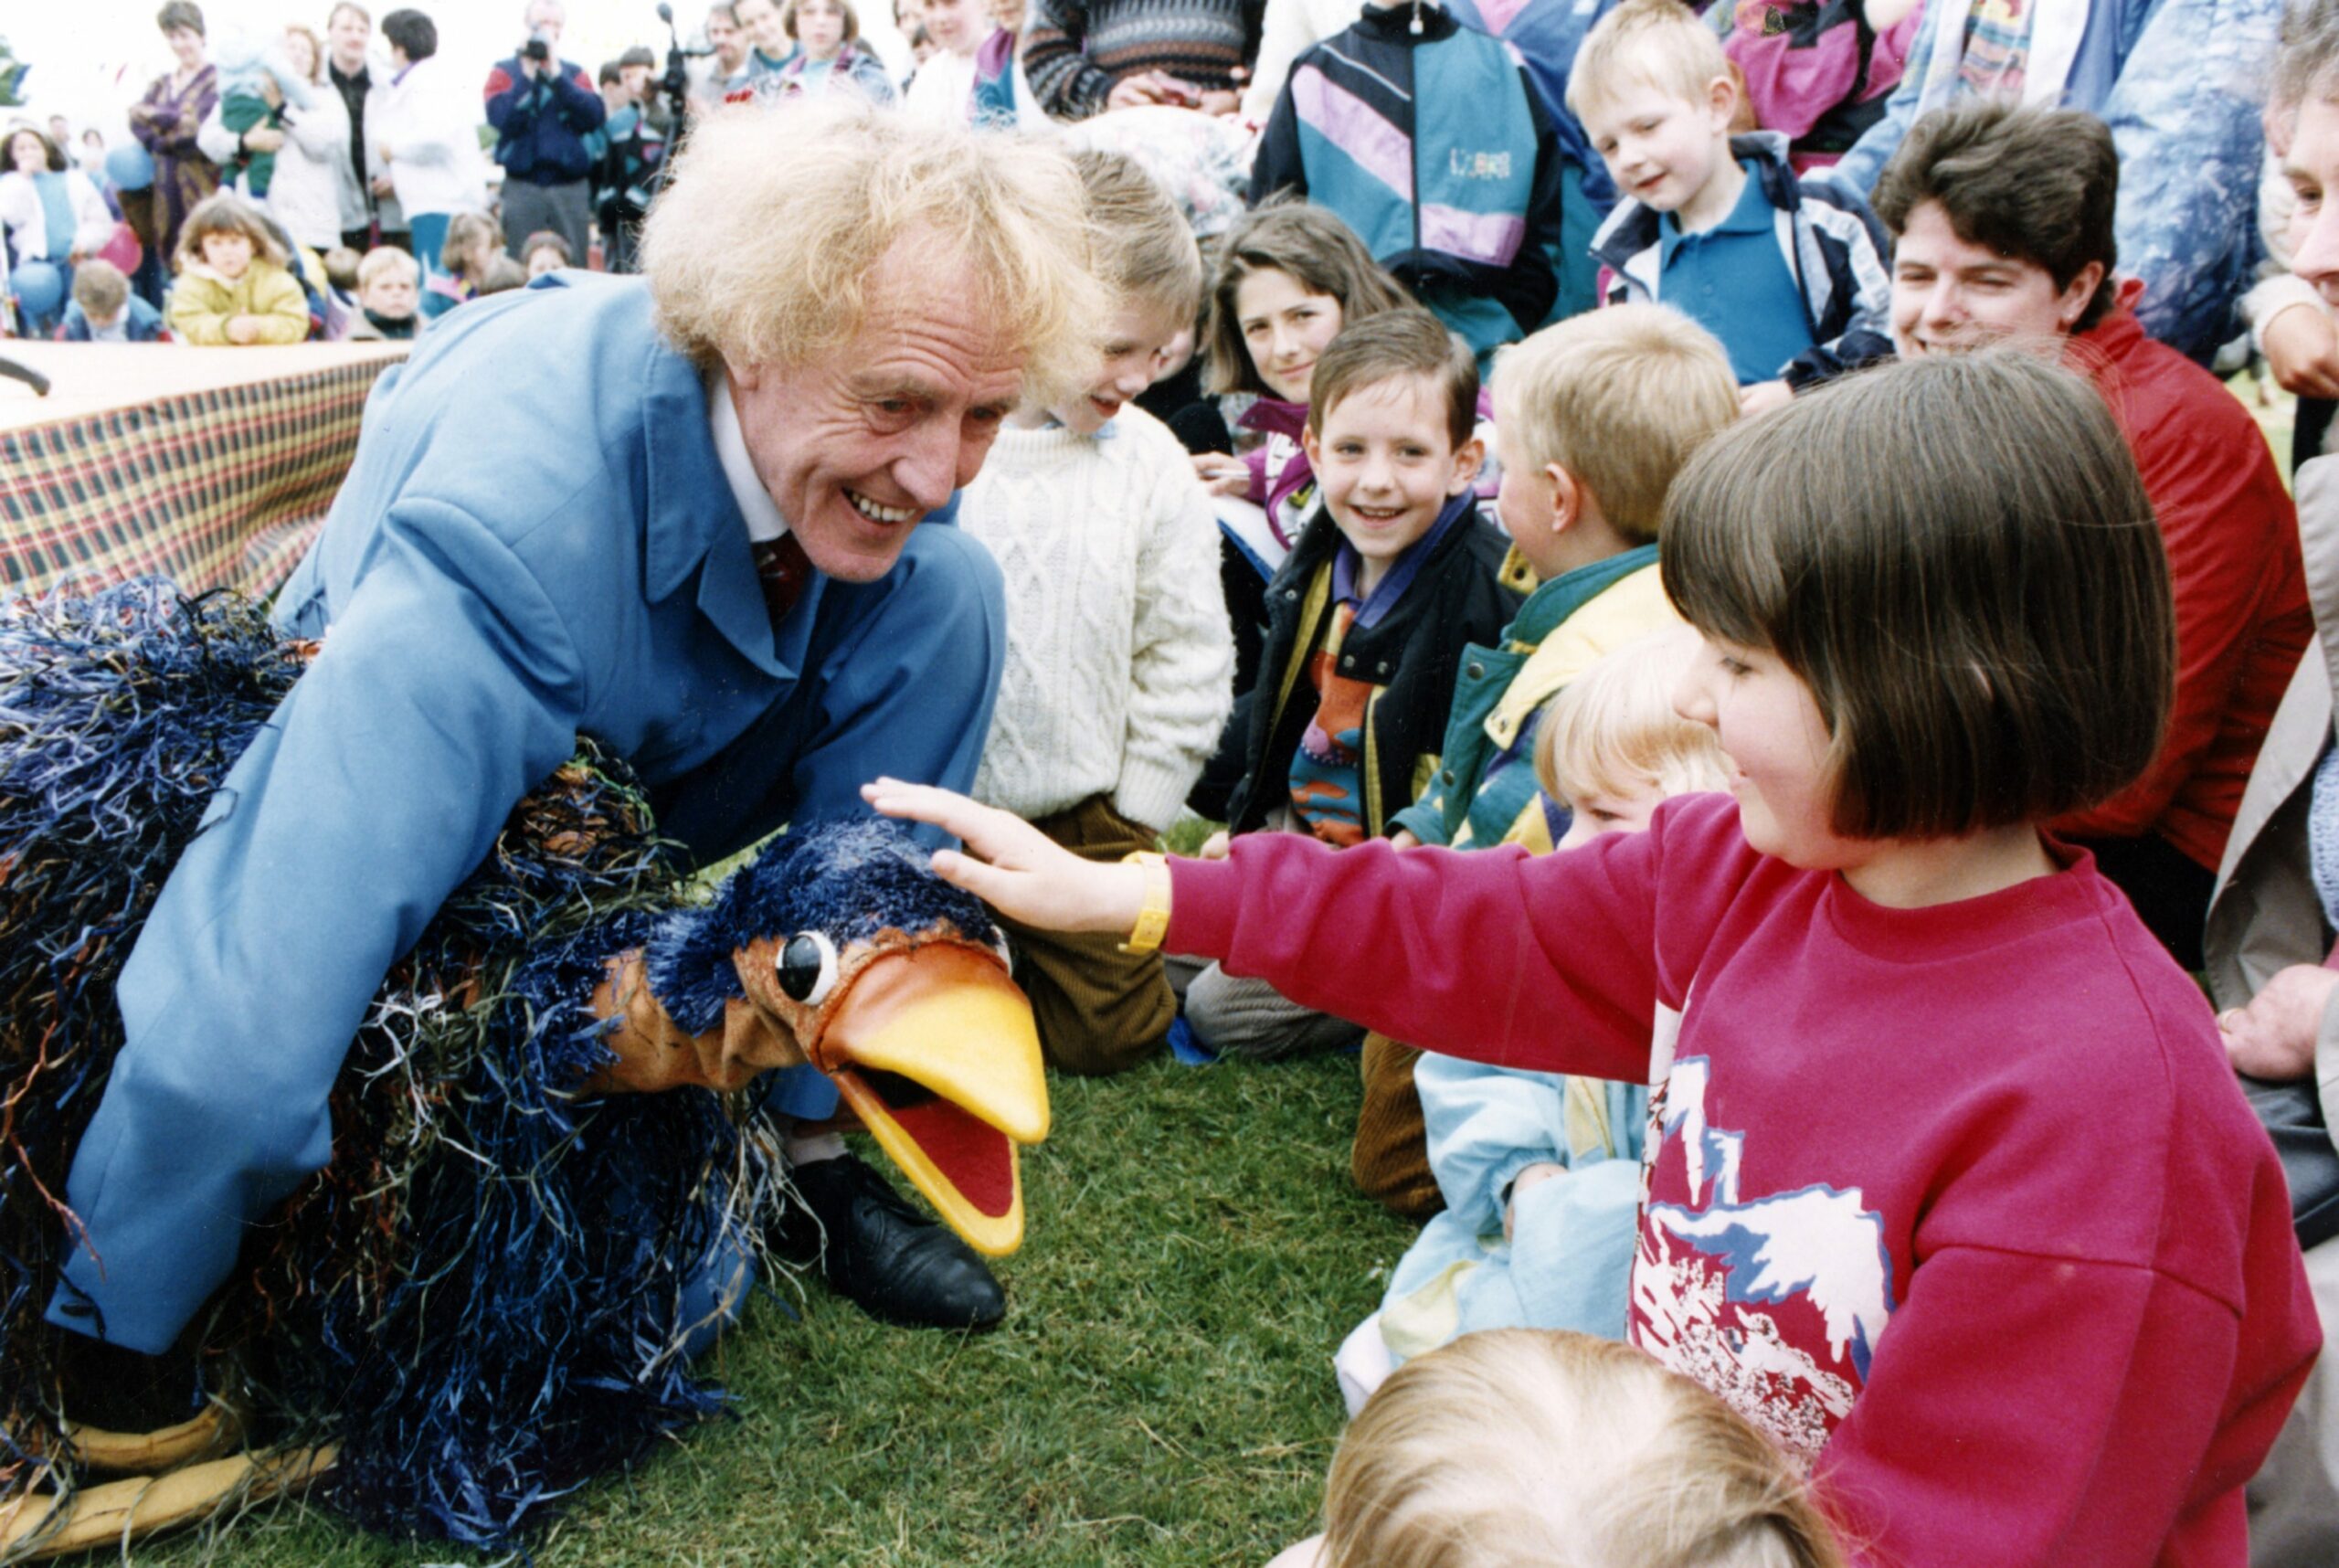 Rod Hull holding the puppet Emu while a young girl pats it's head